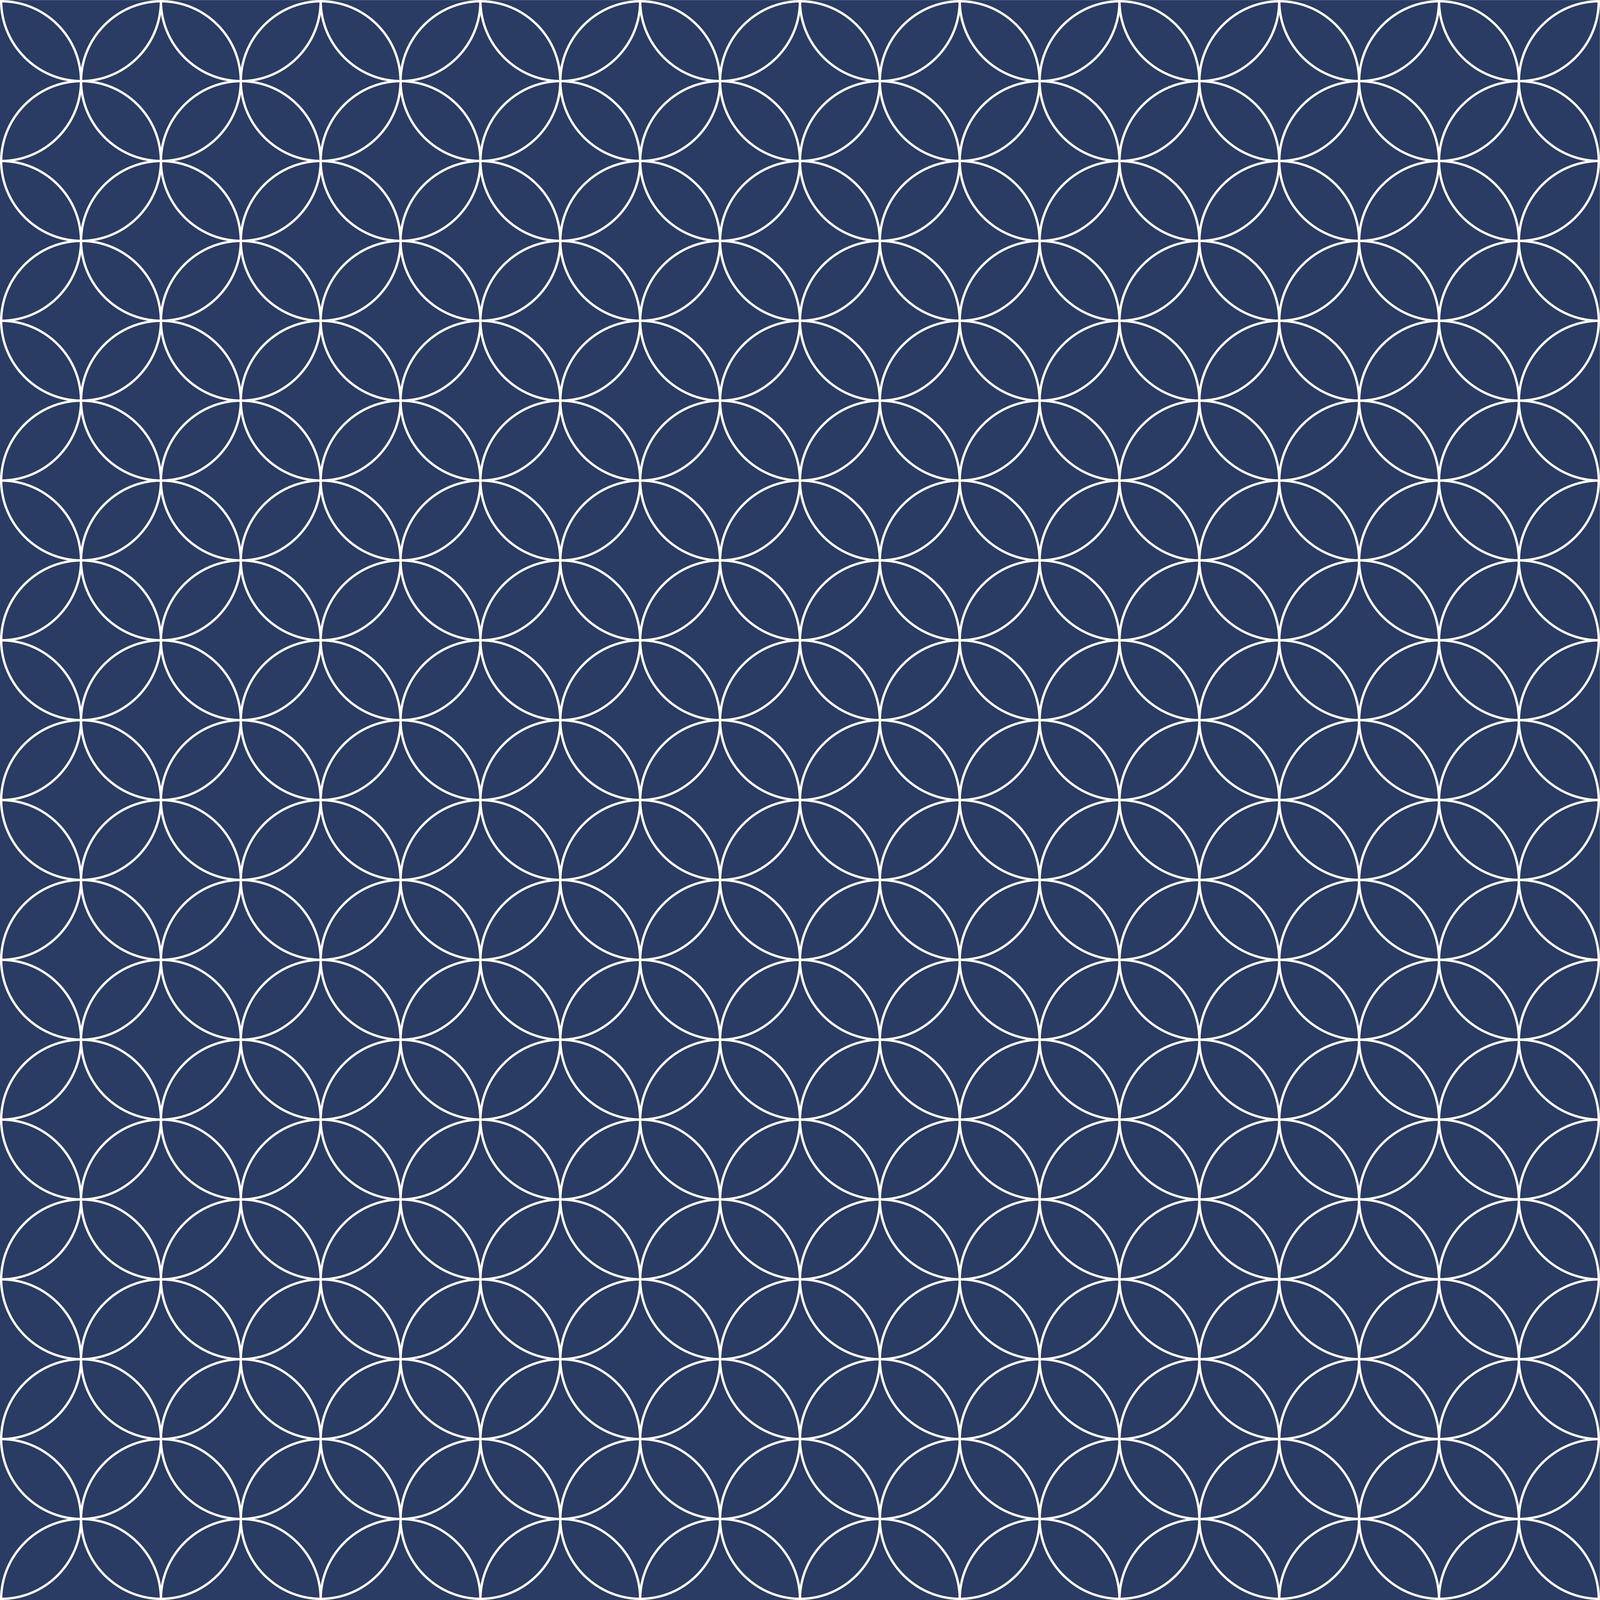 Abstract seamless tile pattern with circles in outlines on a blue background